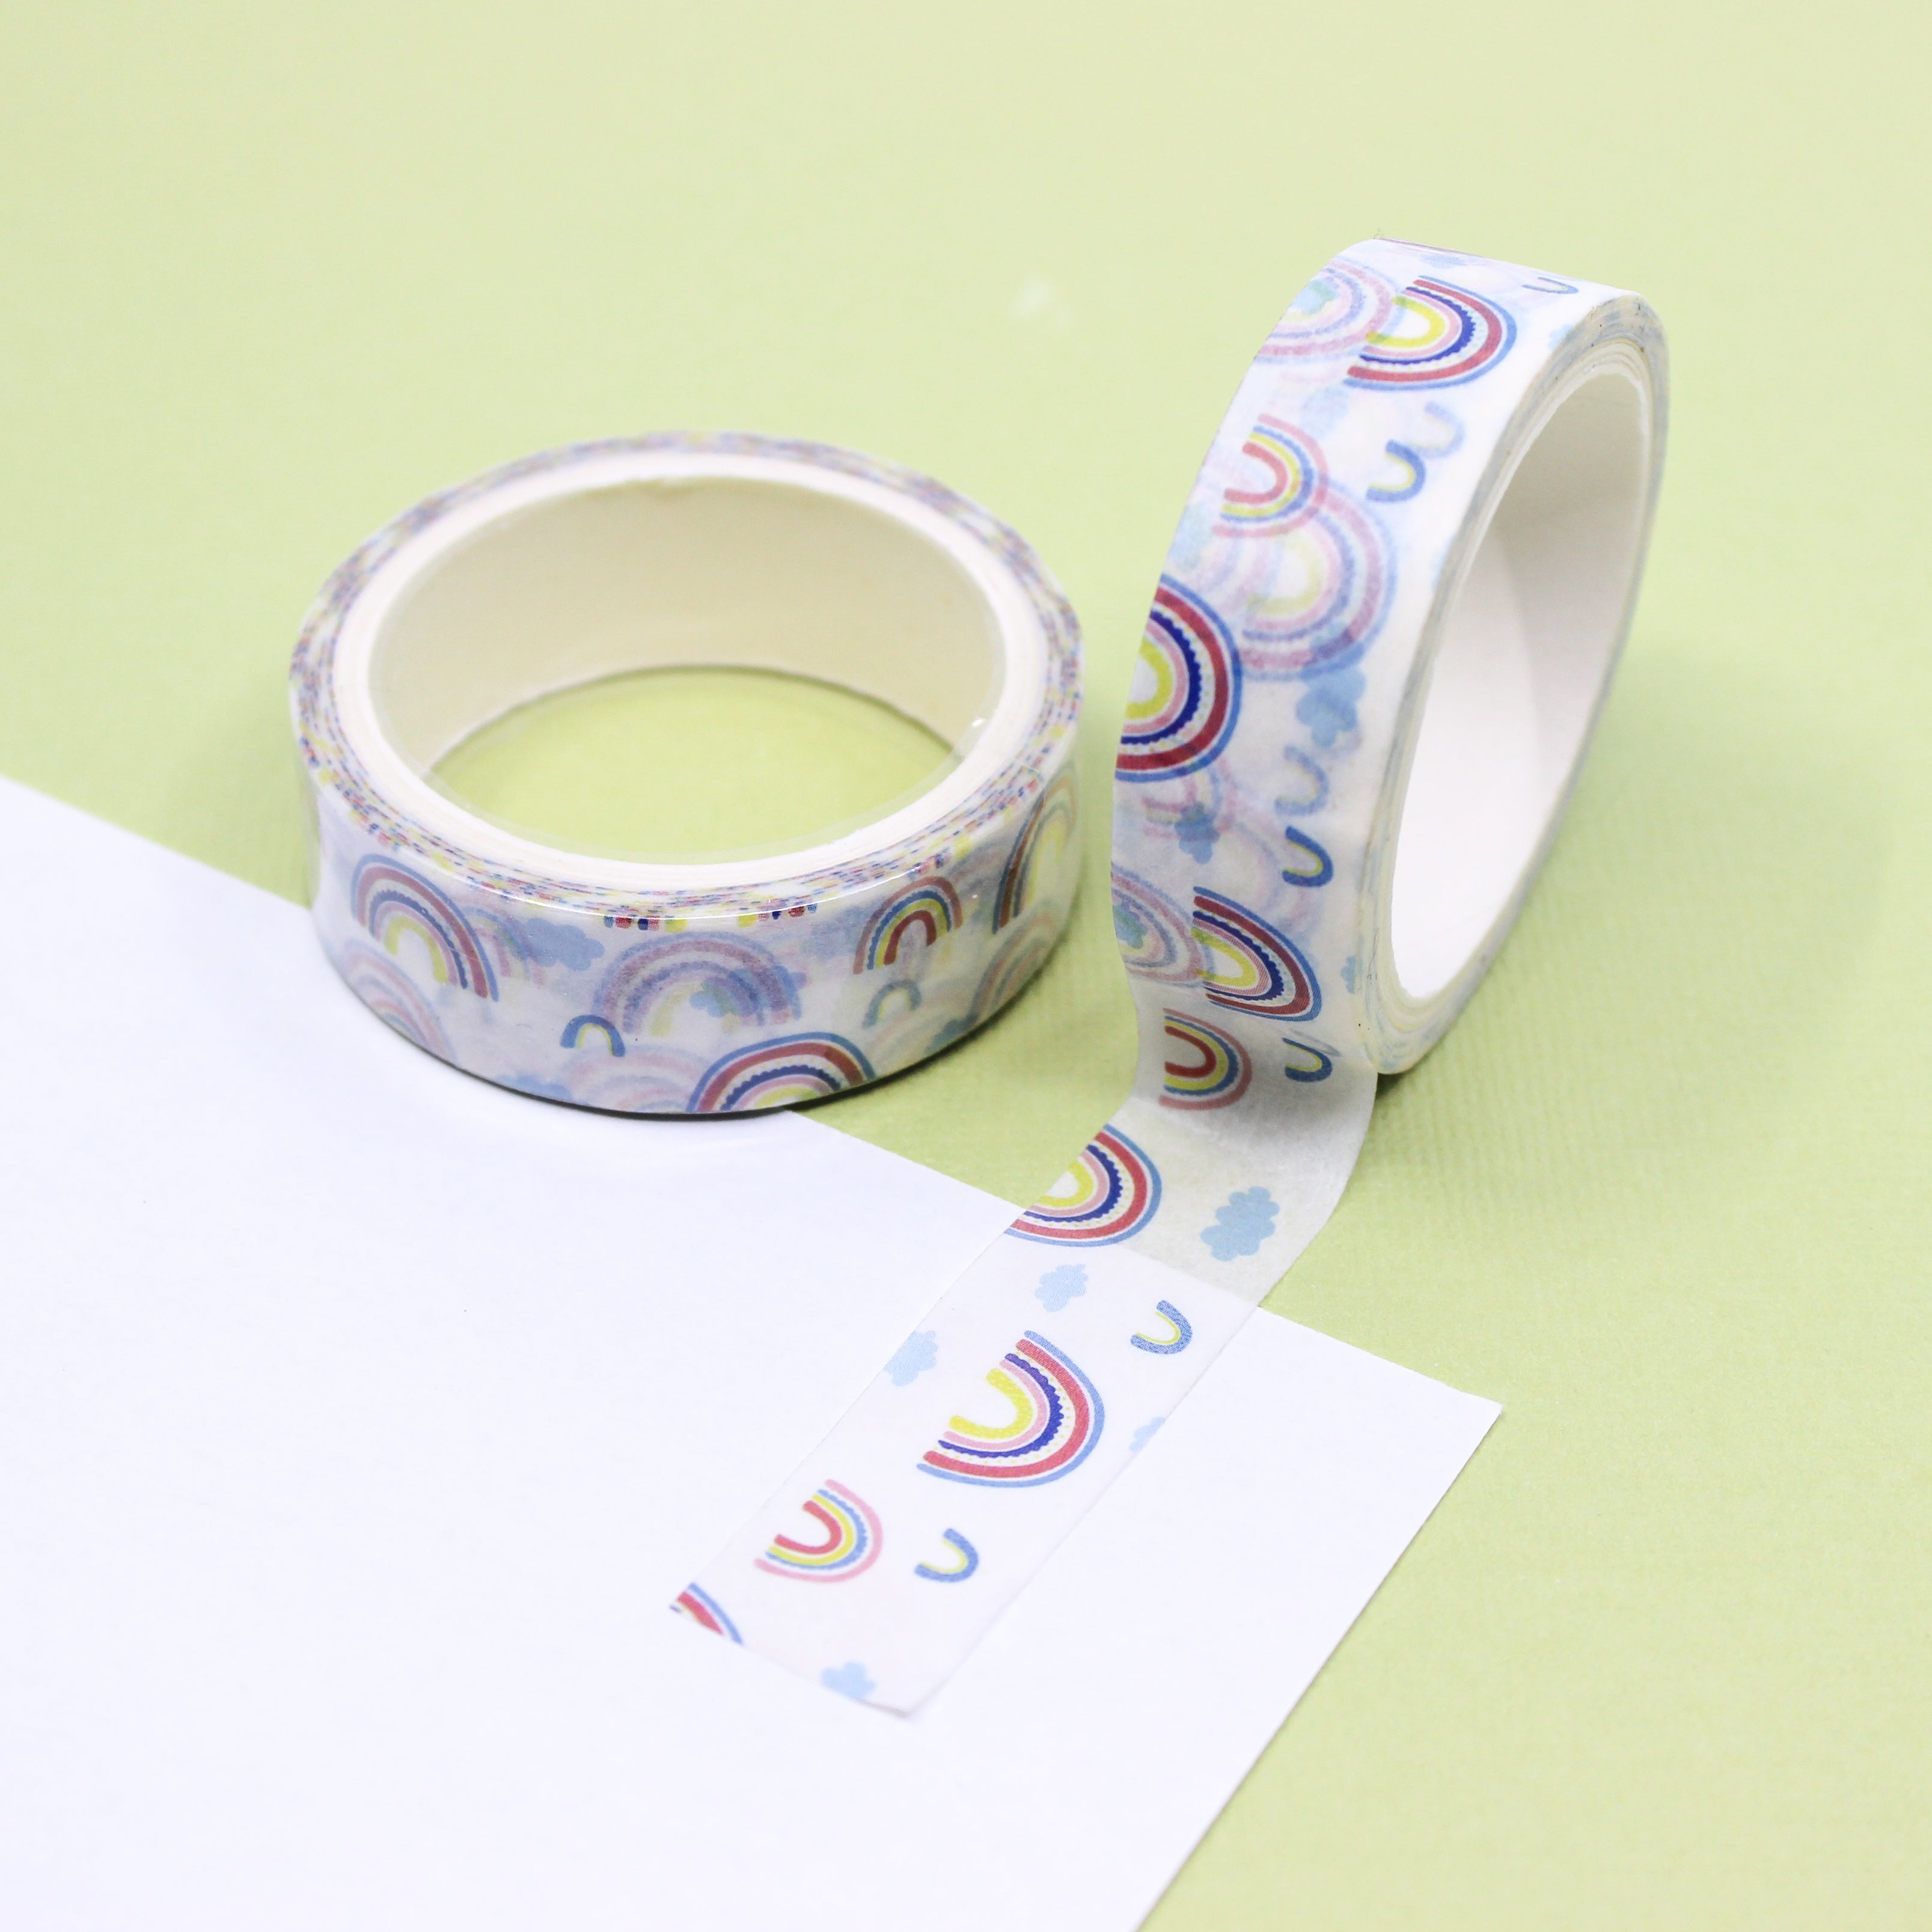 Add a dose of cuteness to your crafts with our Cute Rainbows & Cloud Washi Tape, featuring delightful rainbow and cloud motifs. Perfect for adding a whimsical and cheerful touch to your projects. This tape is sold at BBB Supplies Craft Shop.